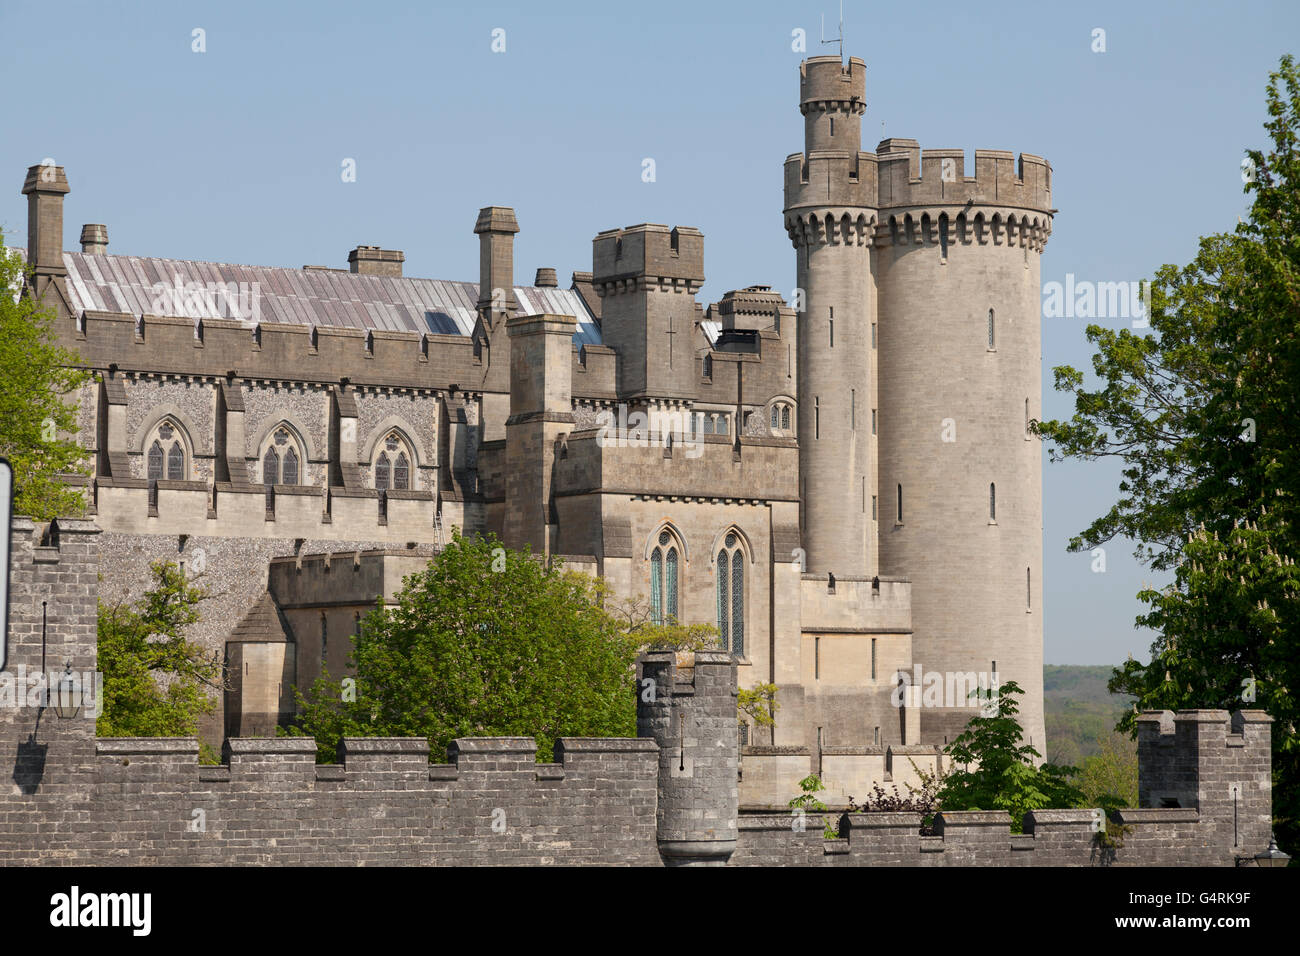 Arundel Castle towers and turrets, Arundel, West Sussex, England, United Kingdom, Europe Stock Photo